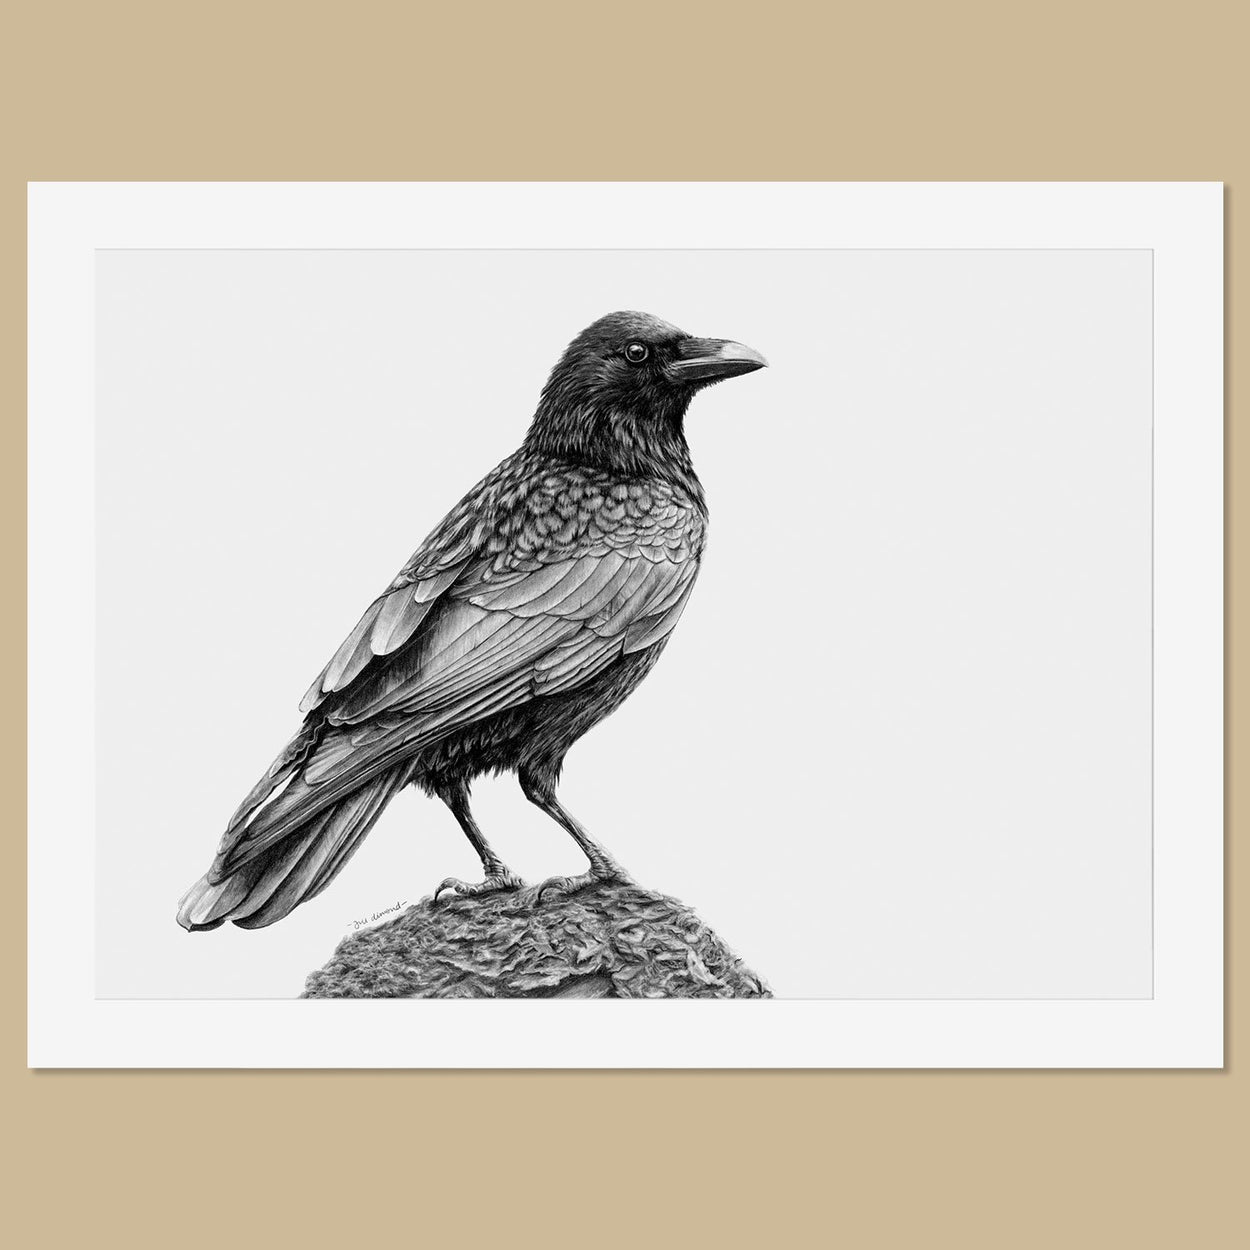 Original Crow Pencil Drawing - The Thriving Wild